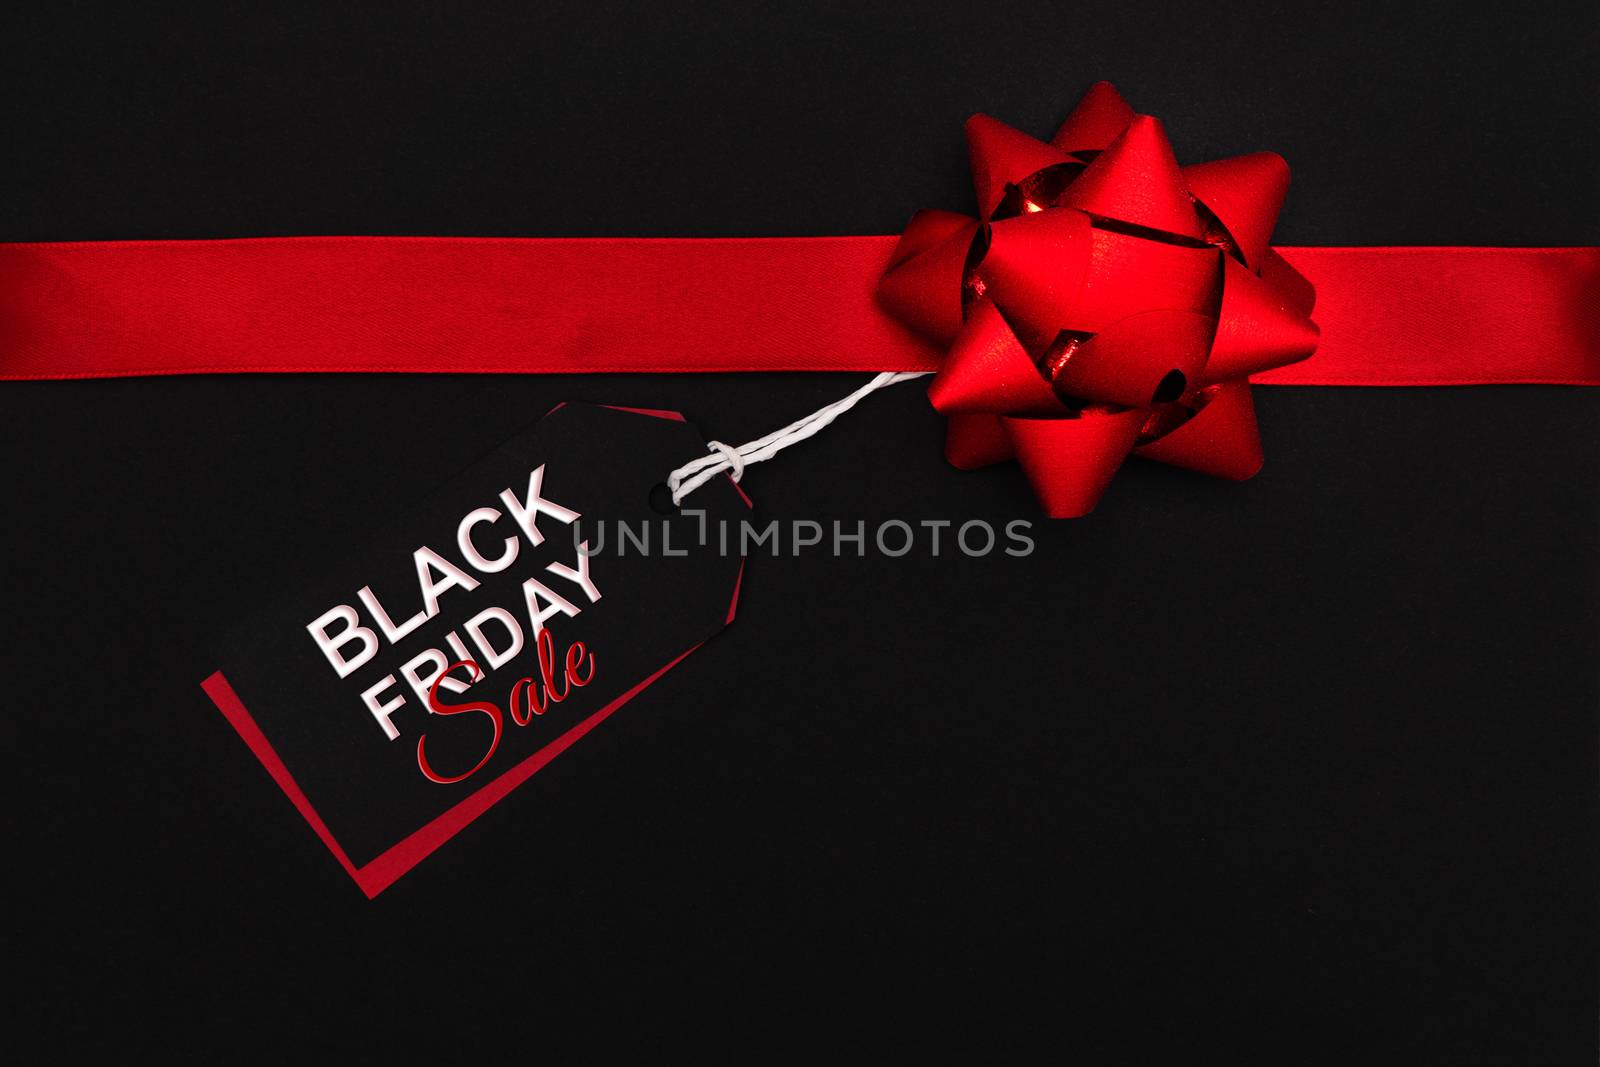 Black Friday sale, luxury gift box with price tag by psodaz